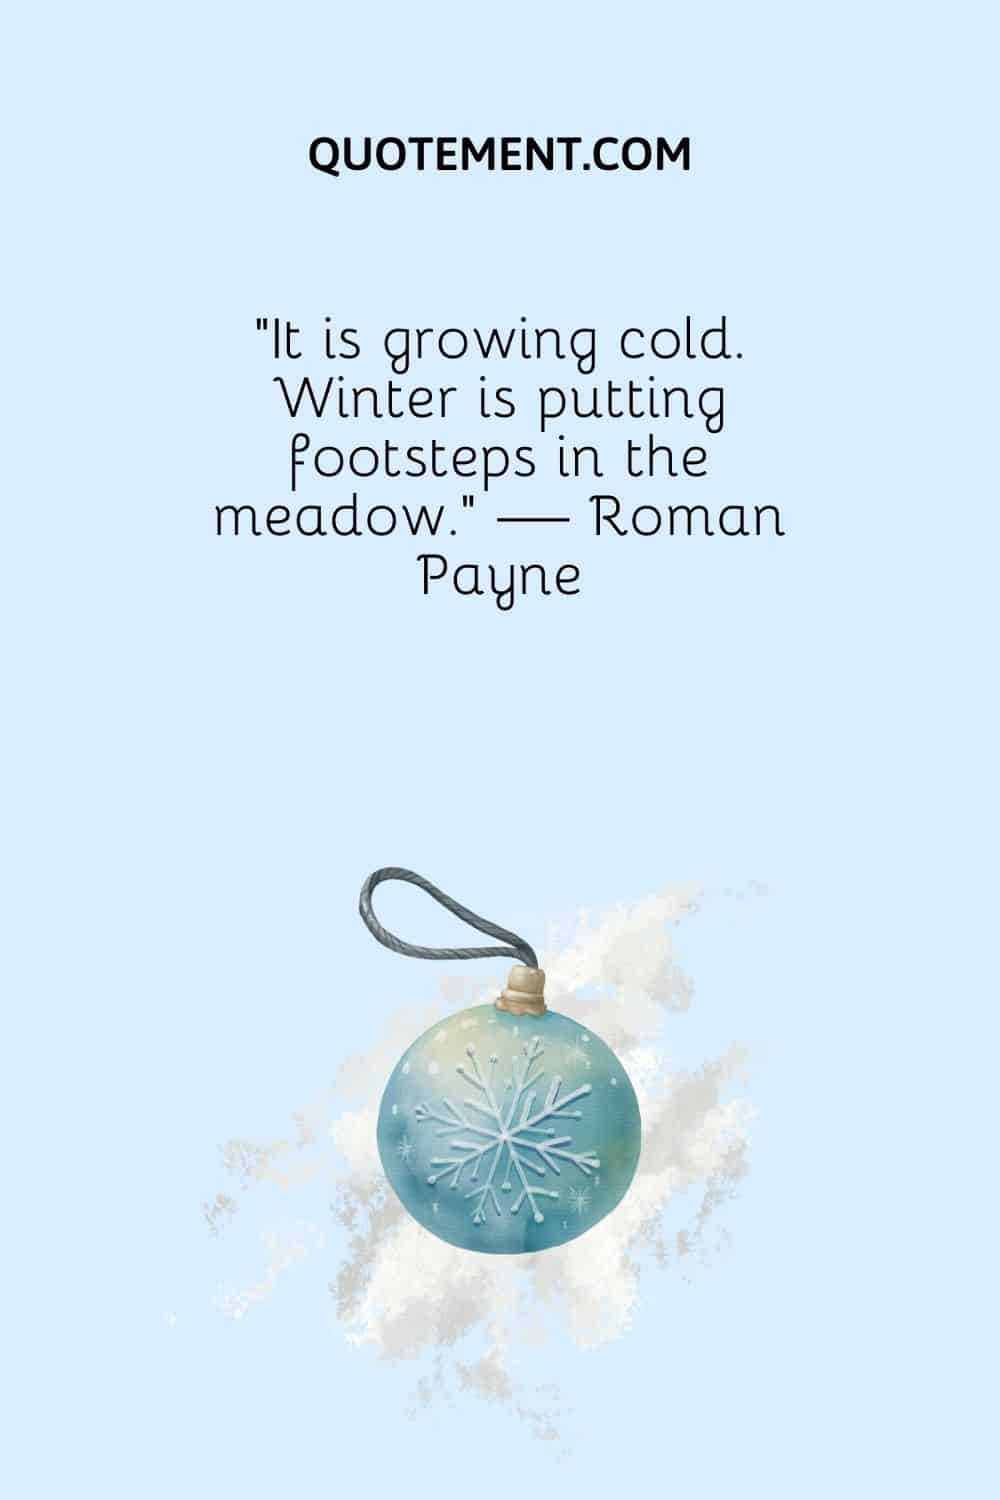 “It is growing cold. Winter is putting footsteps in the meadow.” — Roman Payne